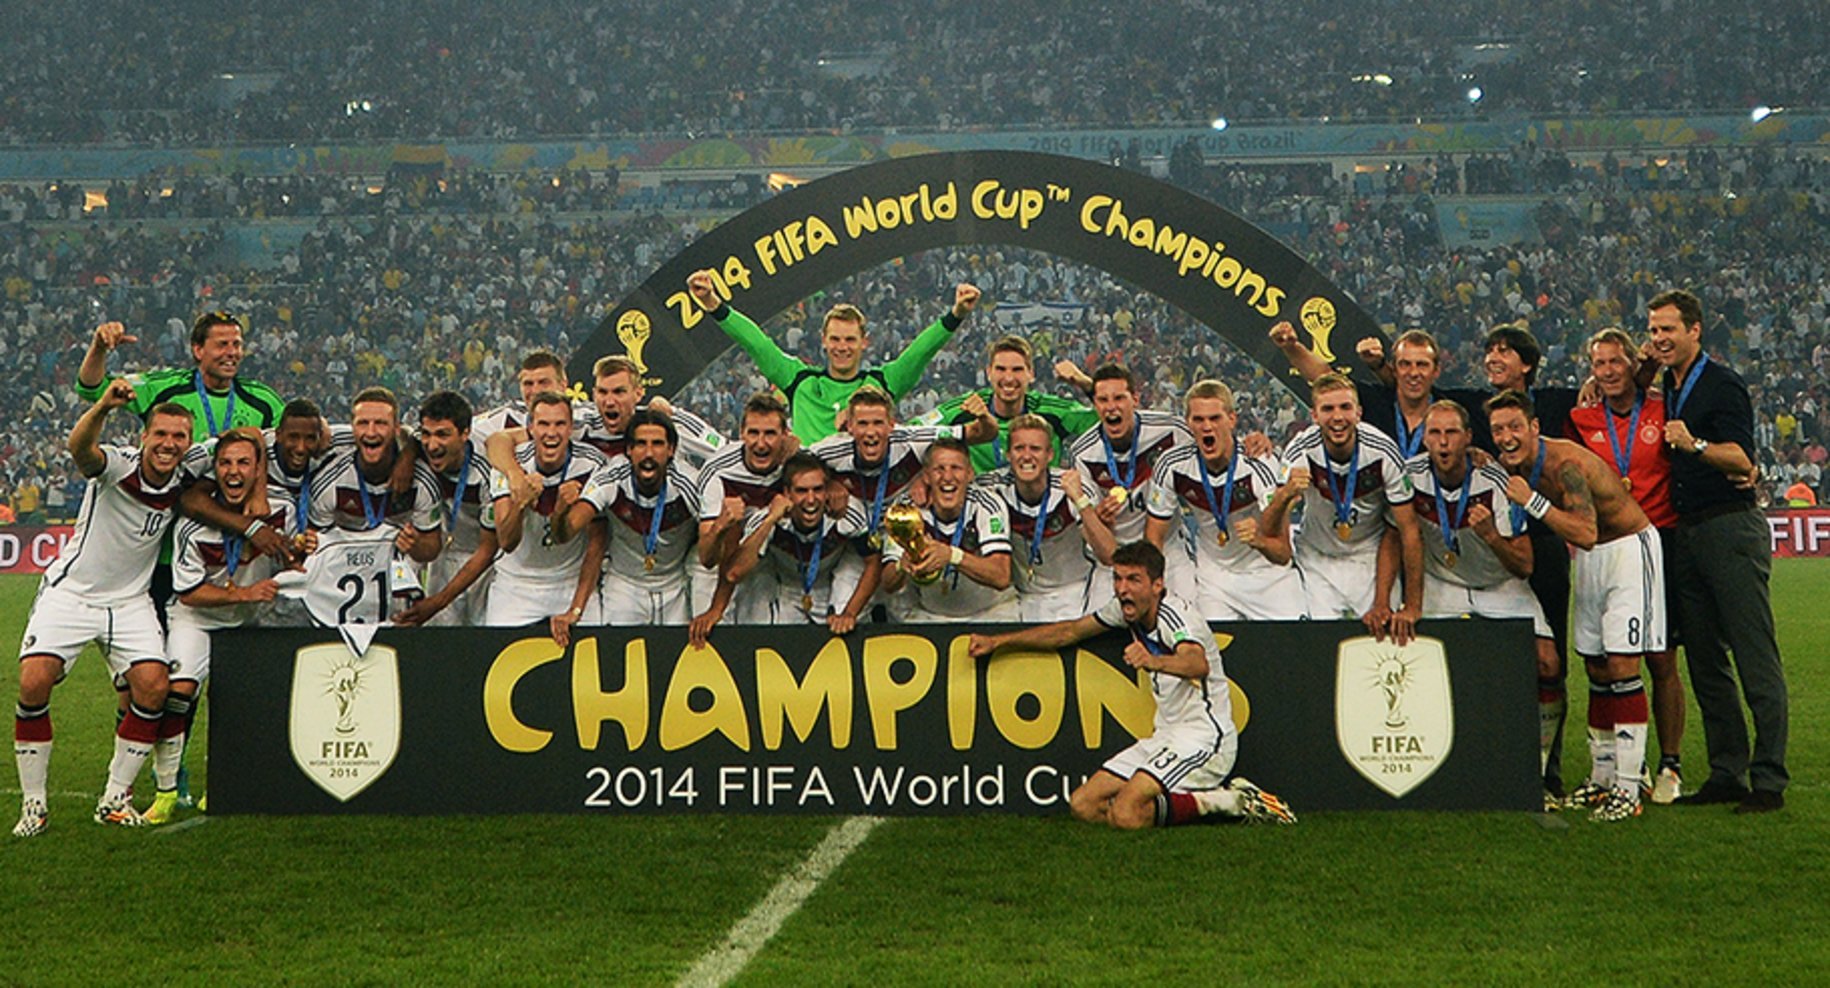 Fifa champions. Germany 2014 World Cup. Germany 2014 Champion. FIFA World Cup Champions. World Champions 2014 финал.